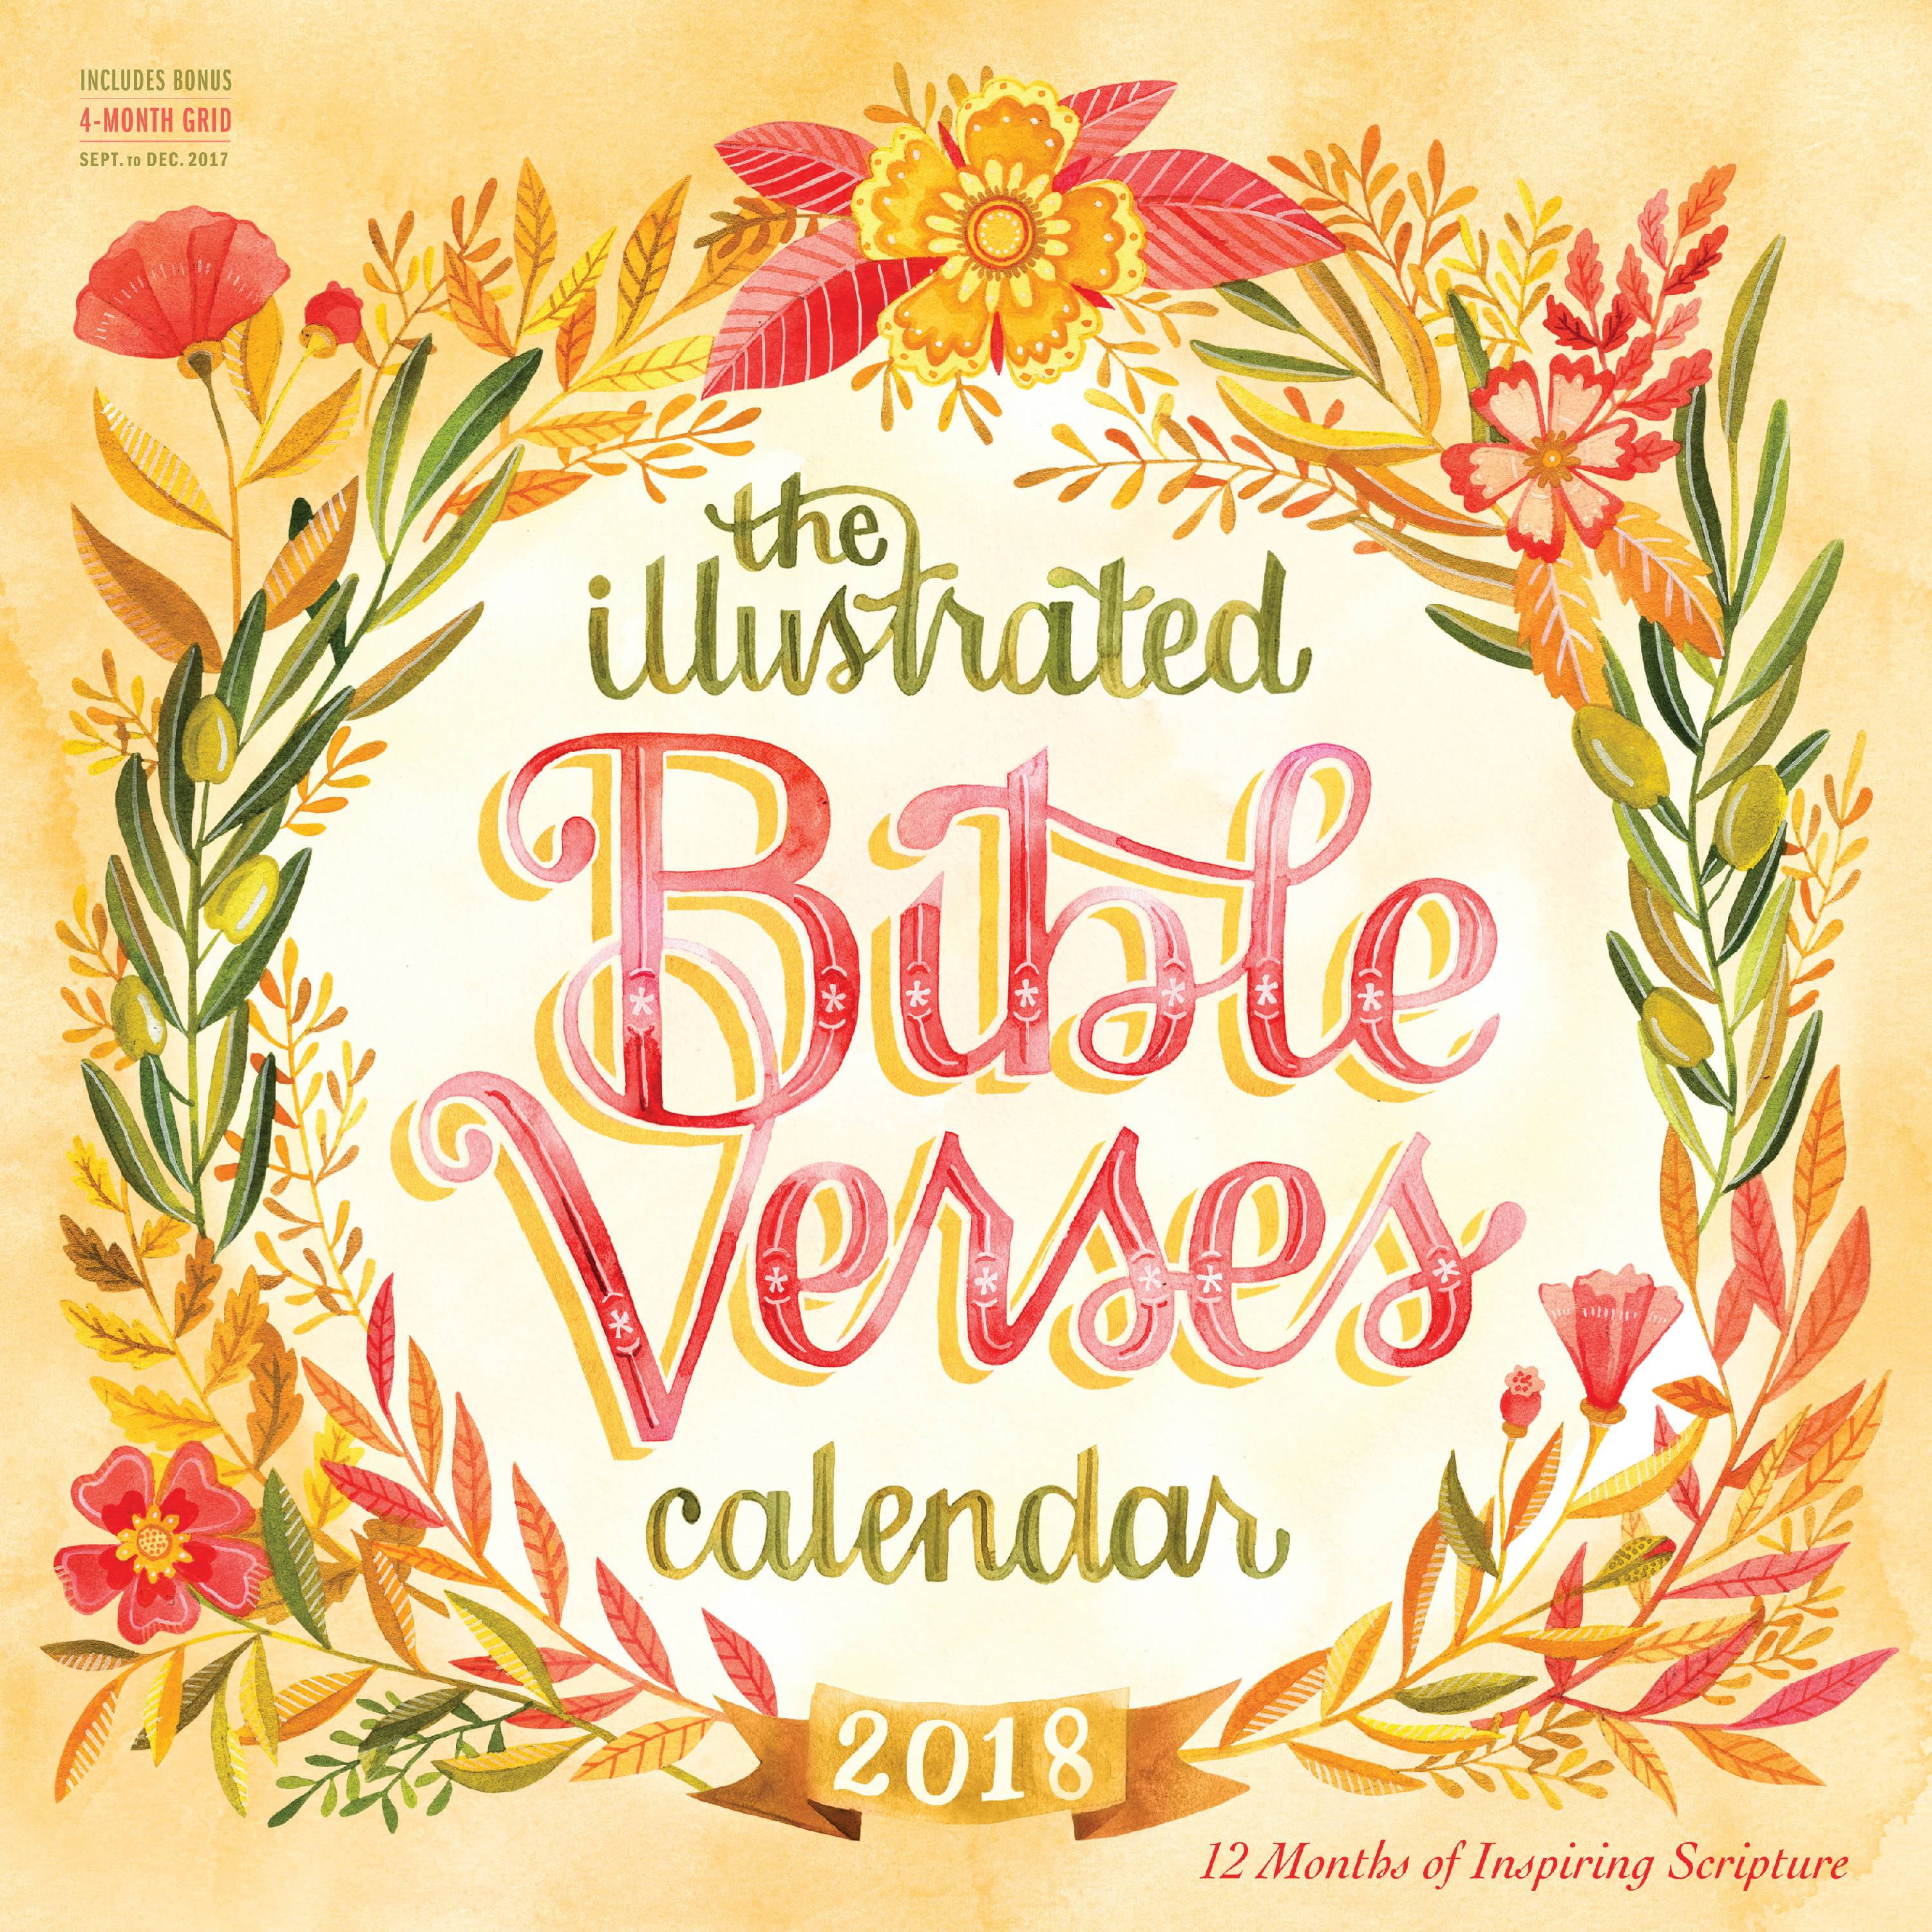 Illustrated Bible Verses Wall Calendar 2018, The